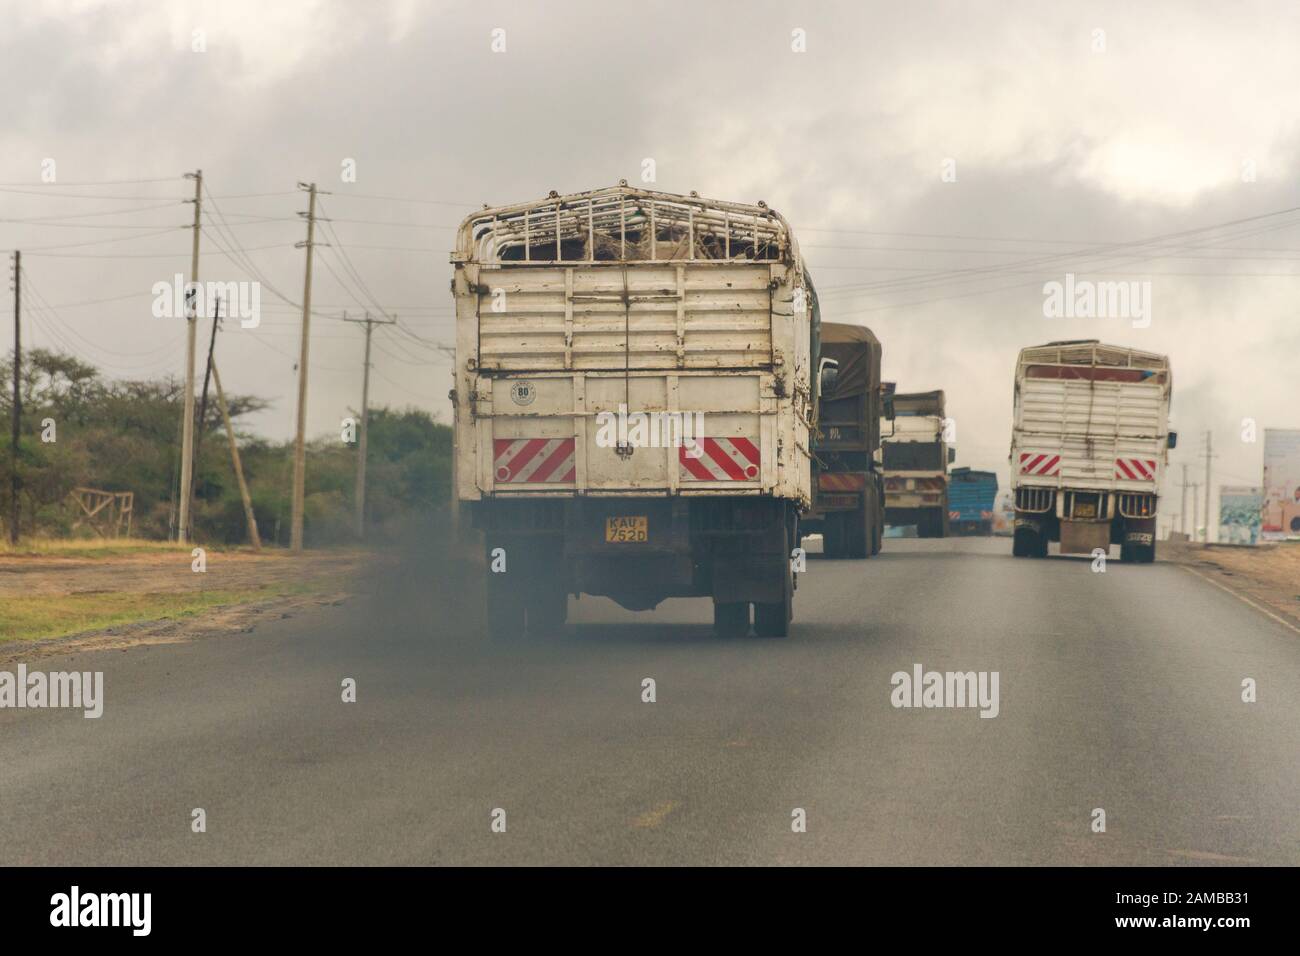 A truck driving along Mombasa highway transporting goods spewing exhaust fumes as it drives along, Kenya Stock Photo